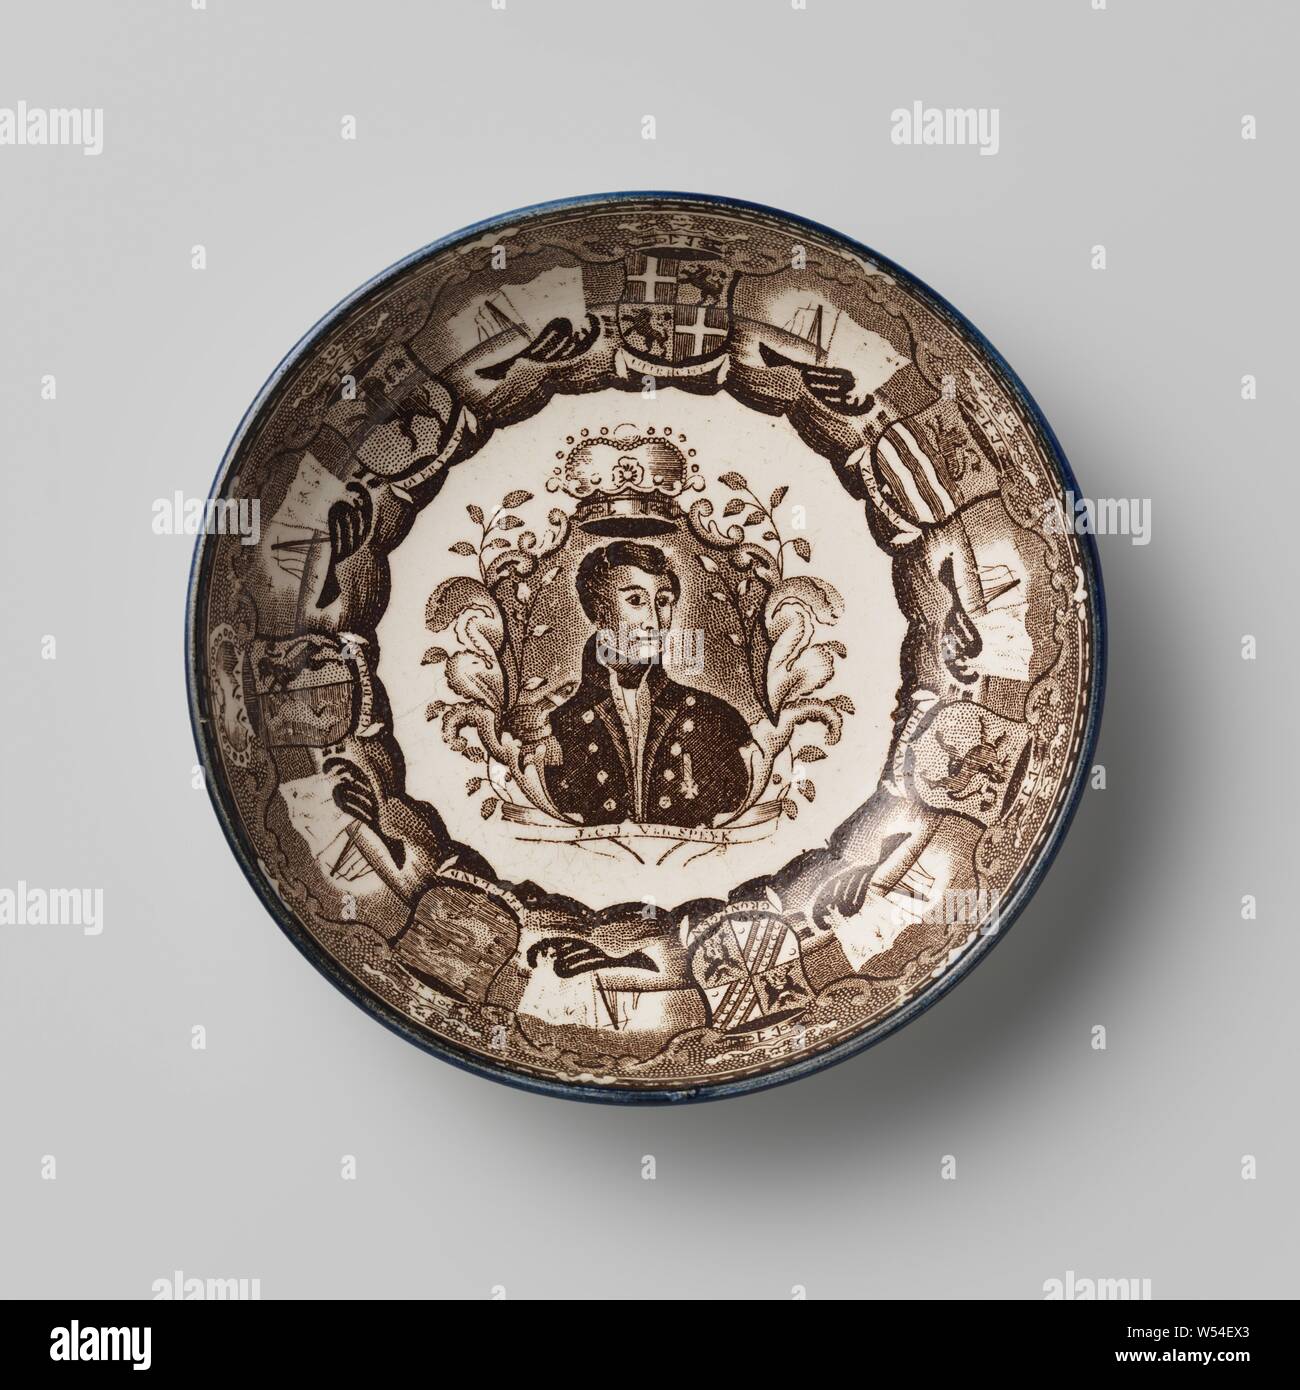 Dish of hard-fired earthenware with a brown transfer as decoration, Dish of hard-fired earthenware. The dish is round and has a representation of a sinking ship and weapons with the names of the provinces as a caption. The dish has an image of a portrait bust with a banderole on which is written JCJ van Speyk. The dish is marked: Scott., Southwick Pottery, Sunderland, c. 1831 - c. 1840, earthenware, d 12.4 cm × h 2.7 cm Stock Photo